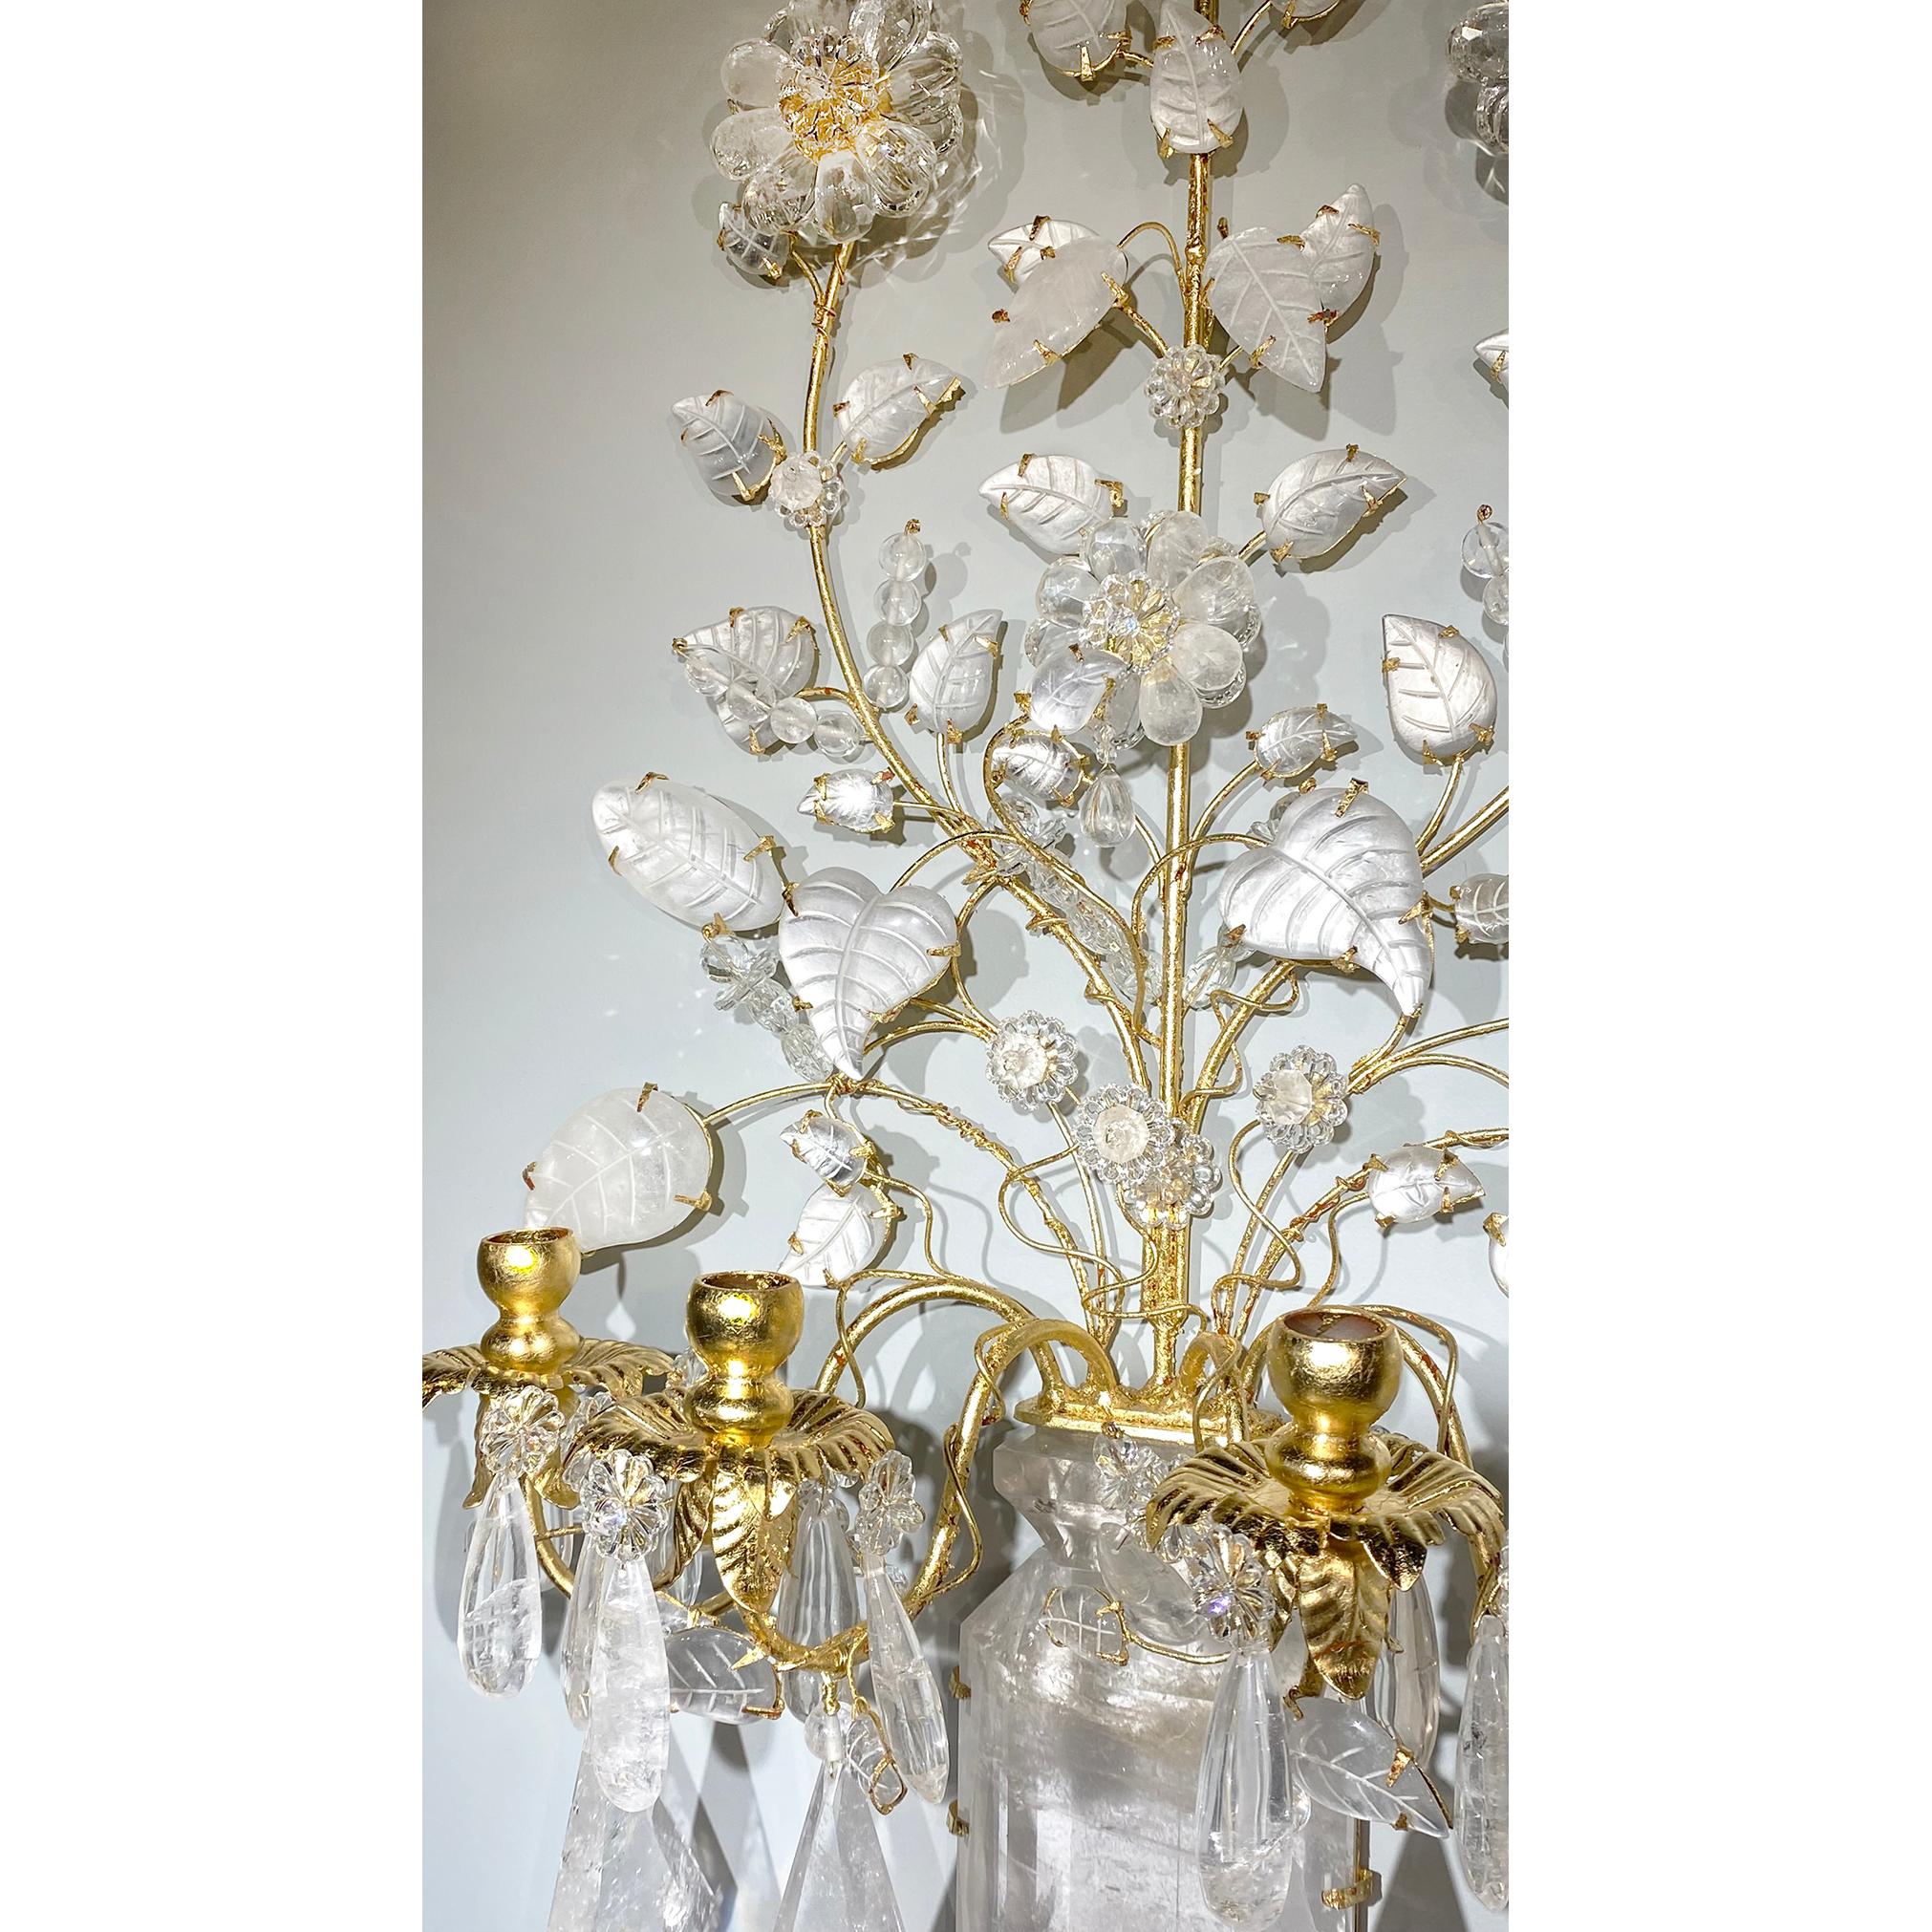 A great pair of rock crystal sconces in Bagues style. An angular vase shaped base made of rock crystal anchors the four gilt bronze lights of the sconce. Decorative floral and leaf accents carved in rock crystal bloom out of the base, creating a